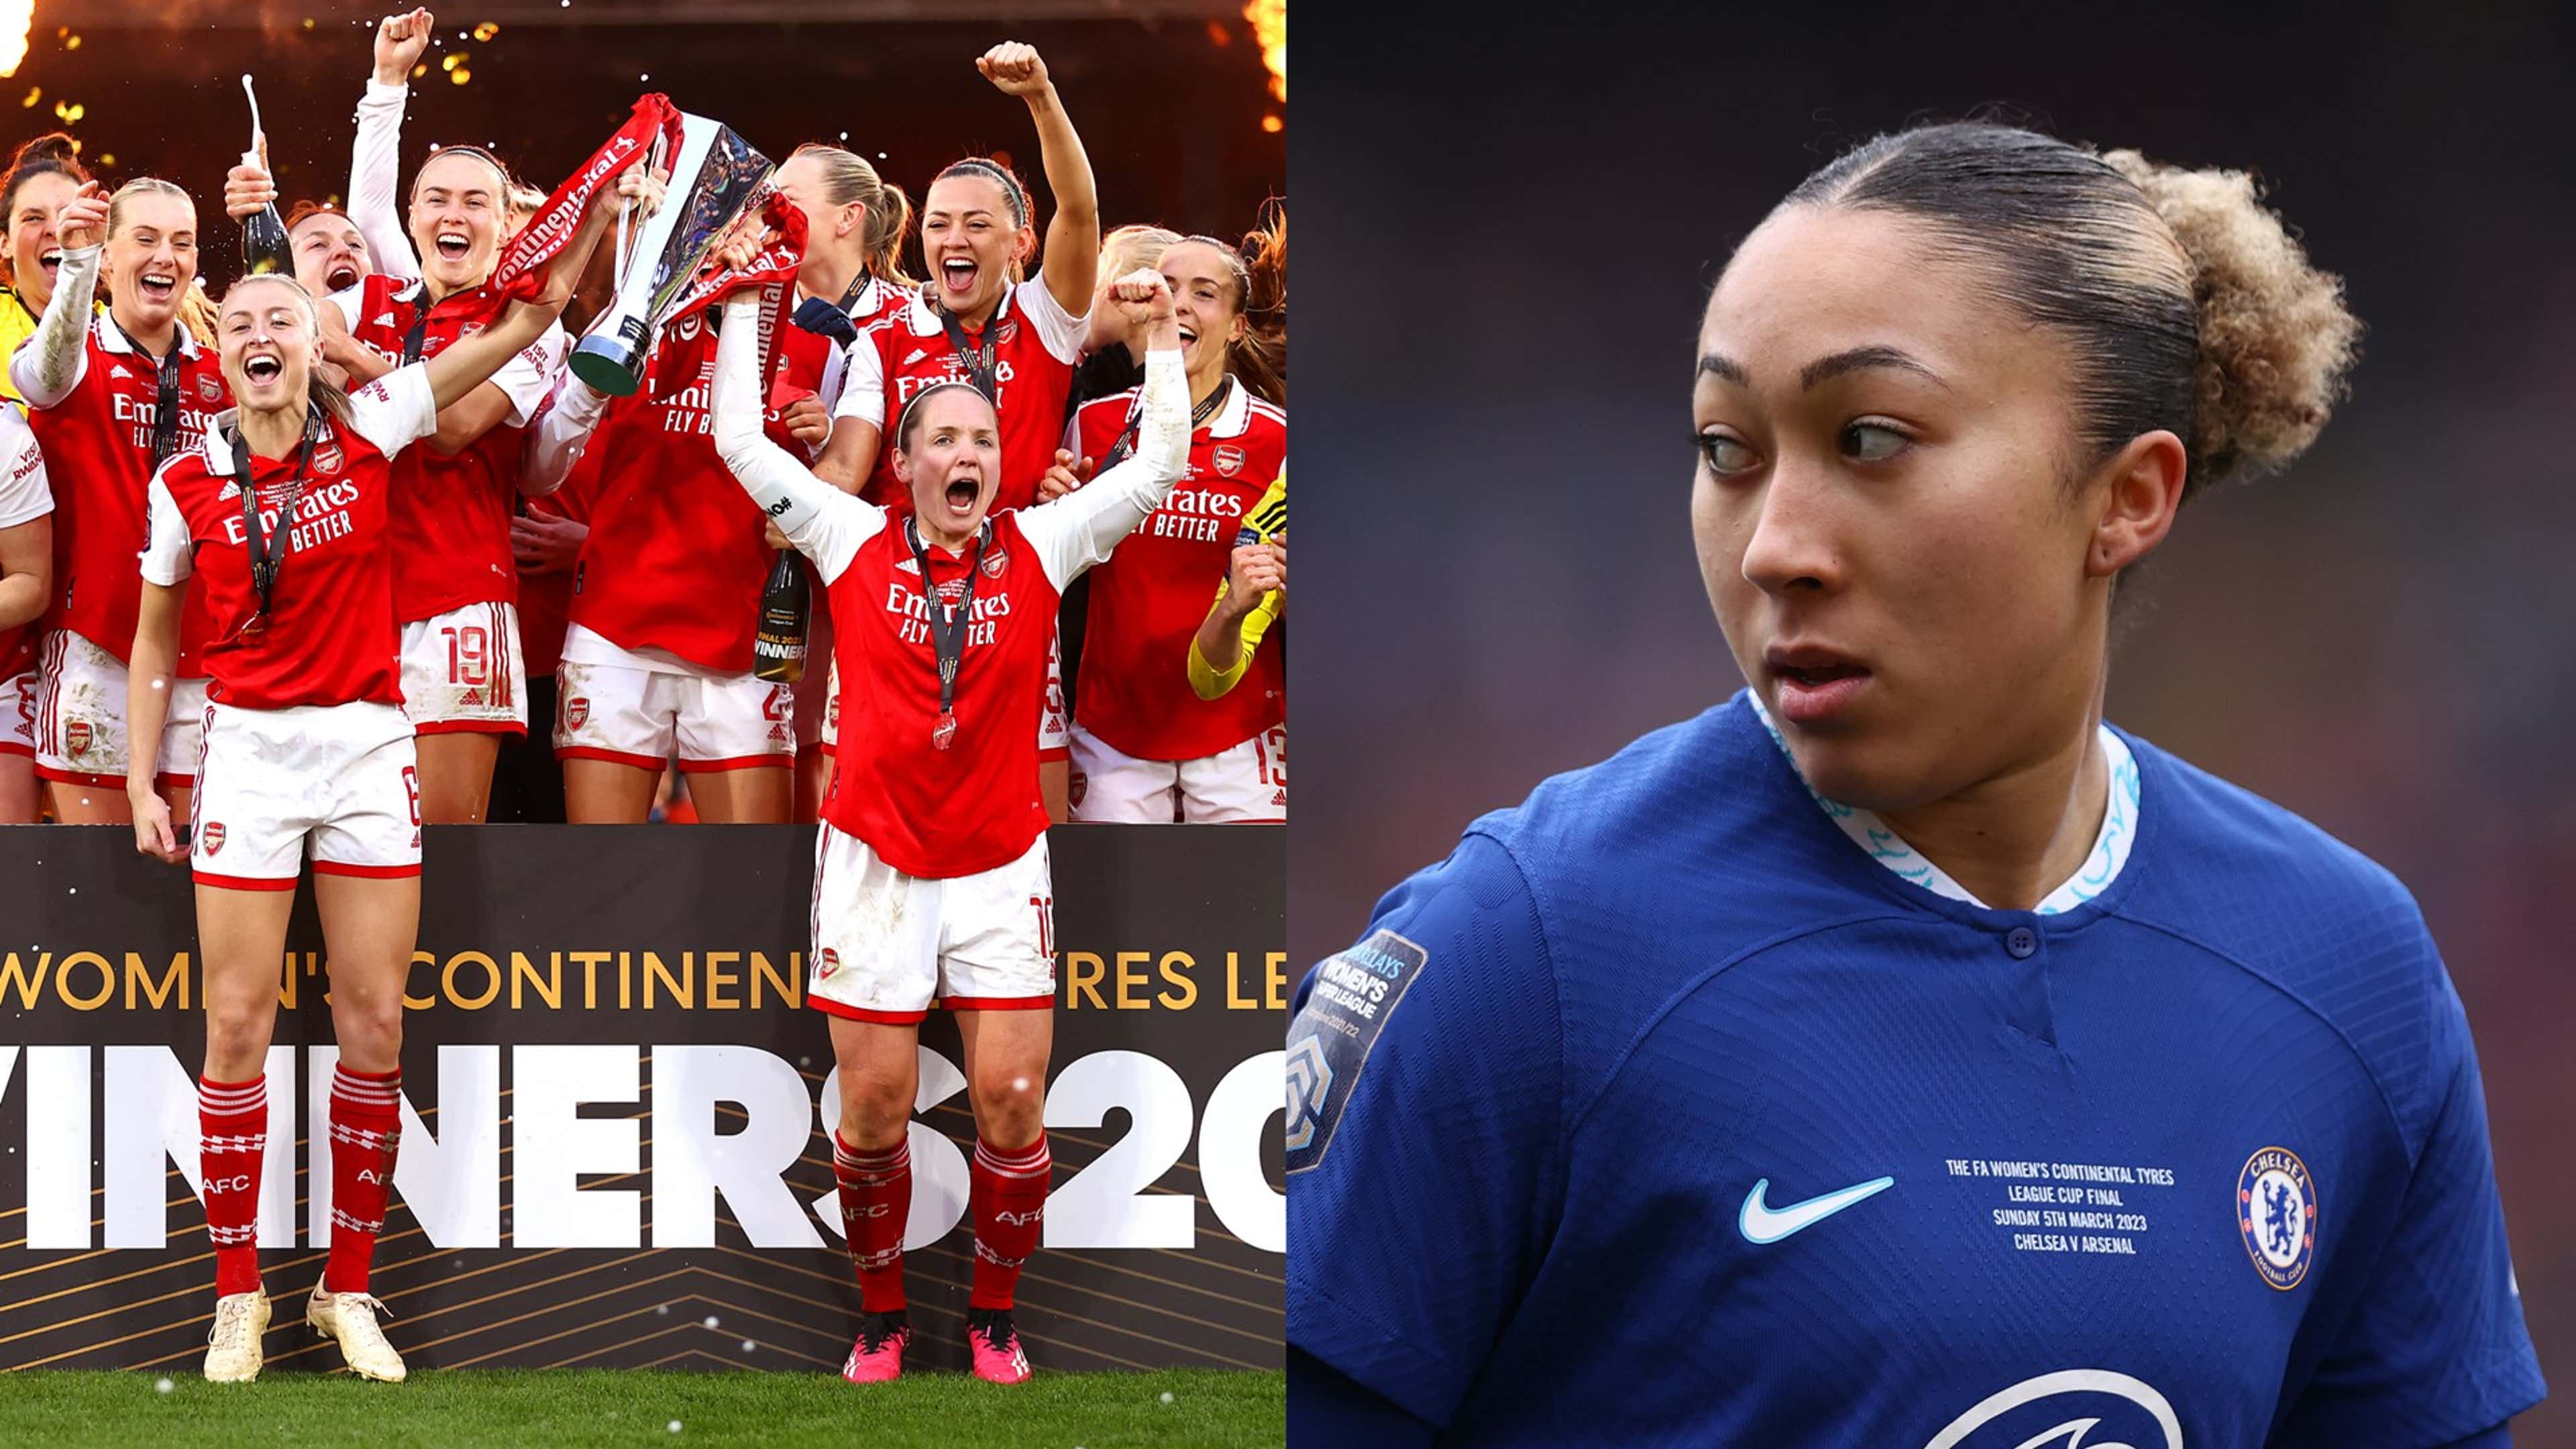 Arsenal Women End Four-Year Trophy Drought In Continental Cup Final